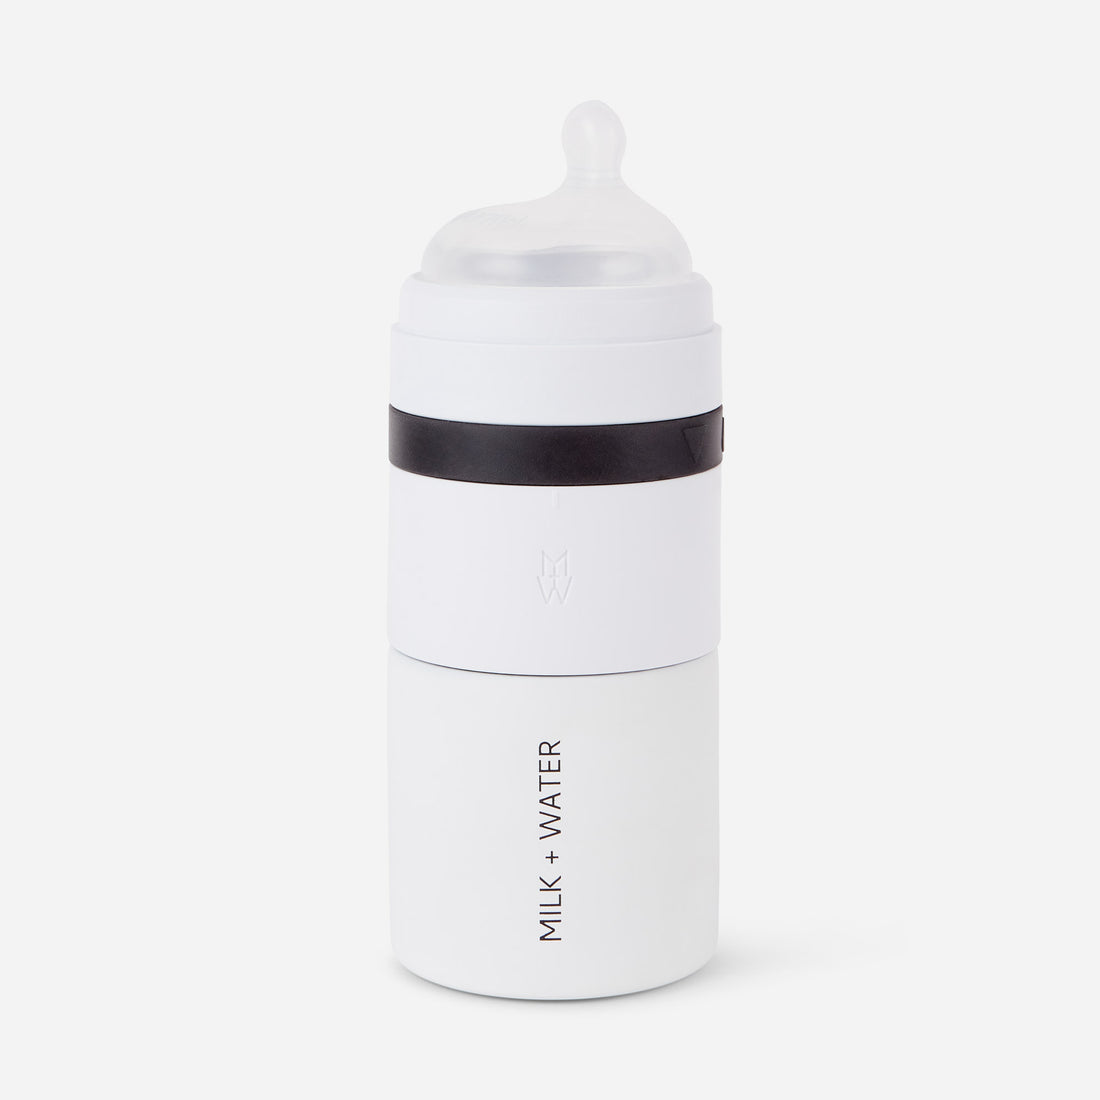 All-In-One Baby Bottle - 5oz